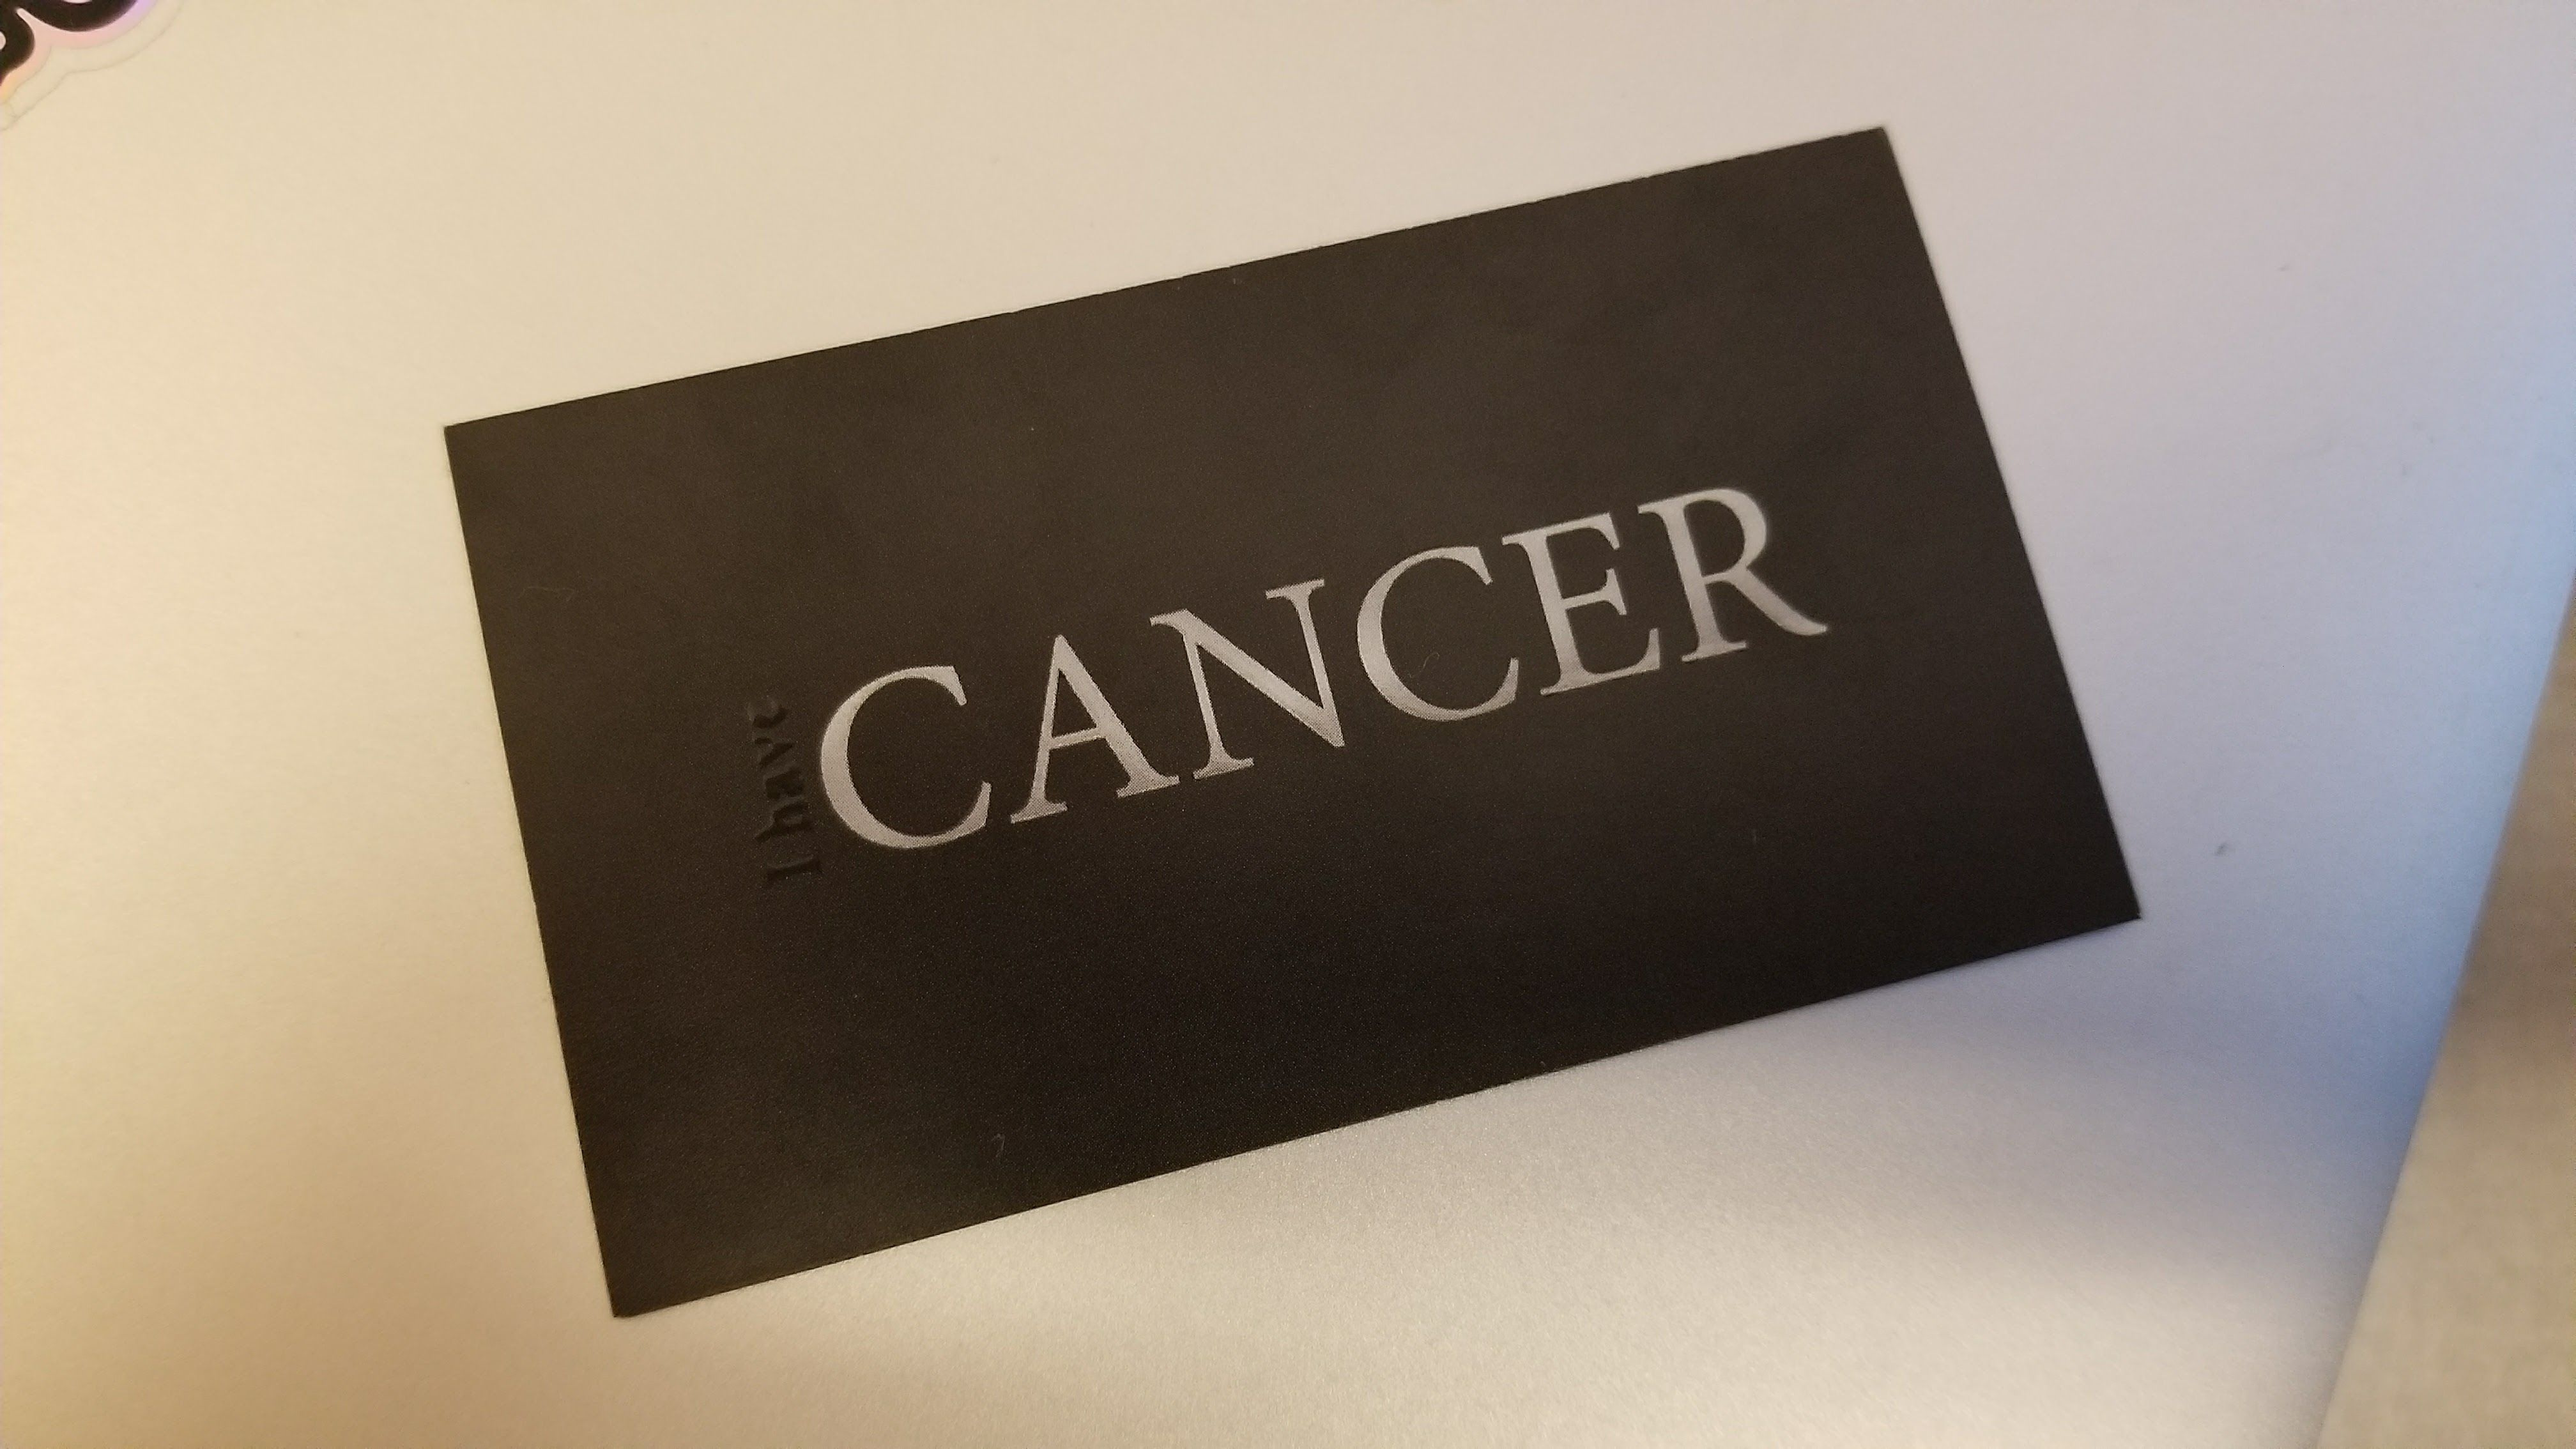 I was recently diagnosed with Leukemia and joked with my sister about playing the "cancer card". Wow did she deliver.